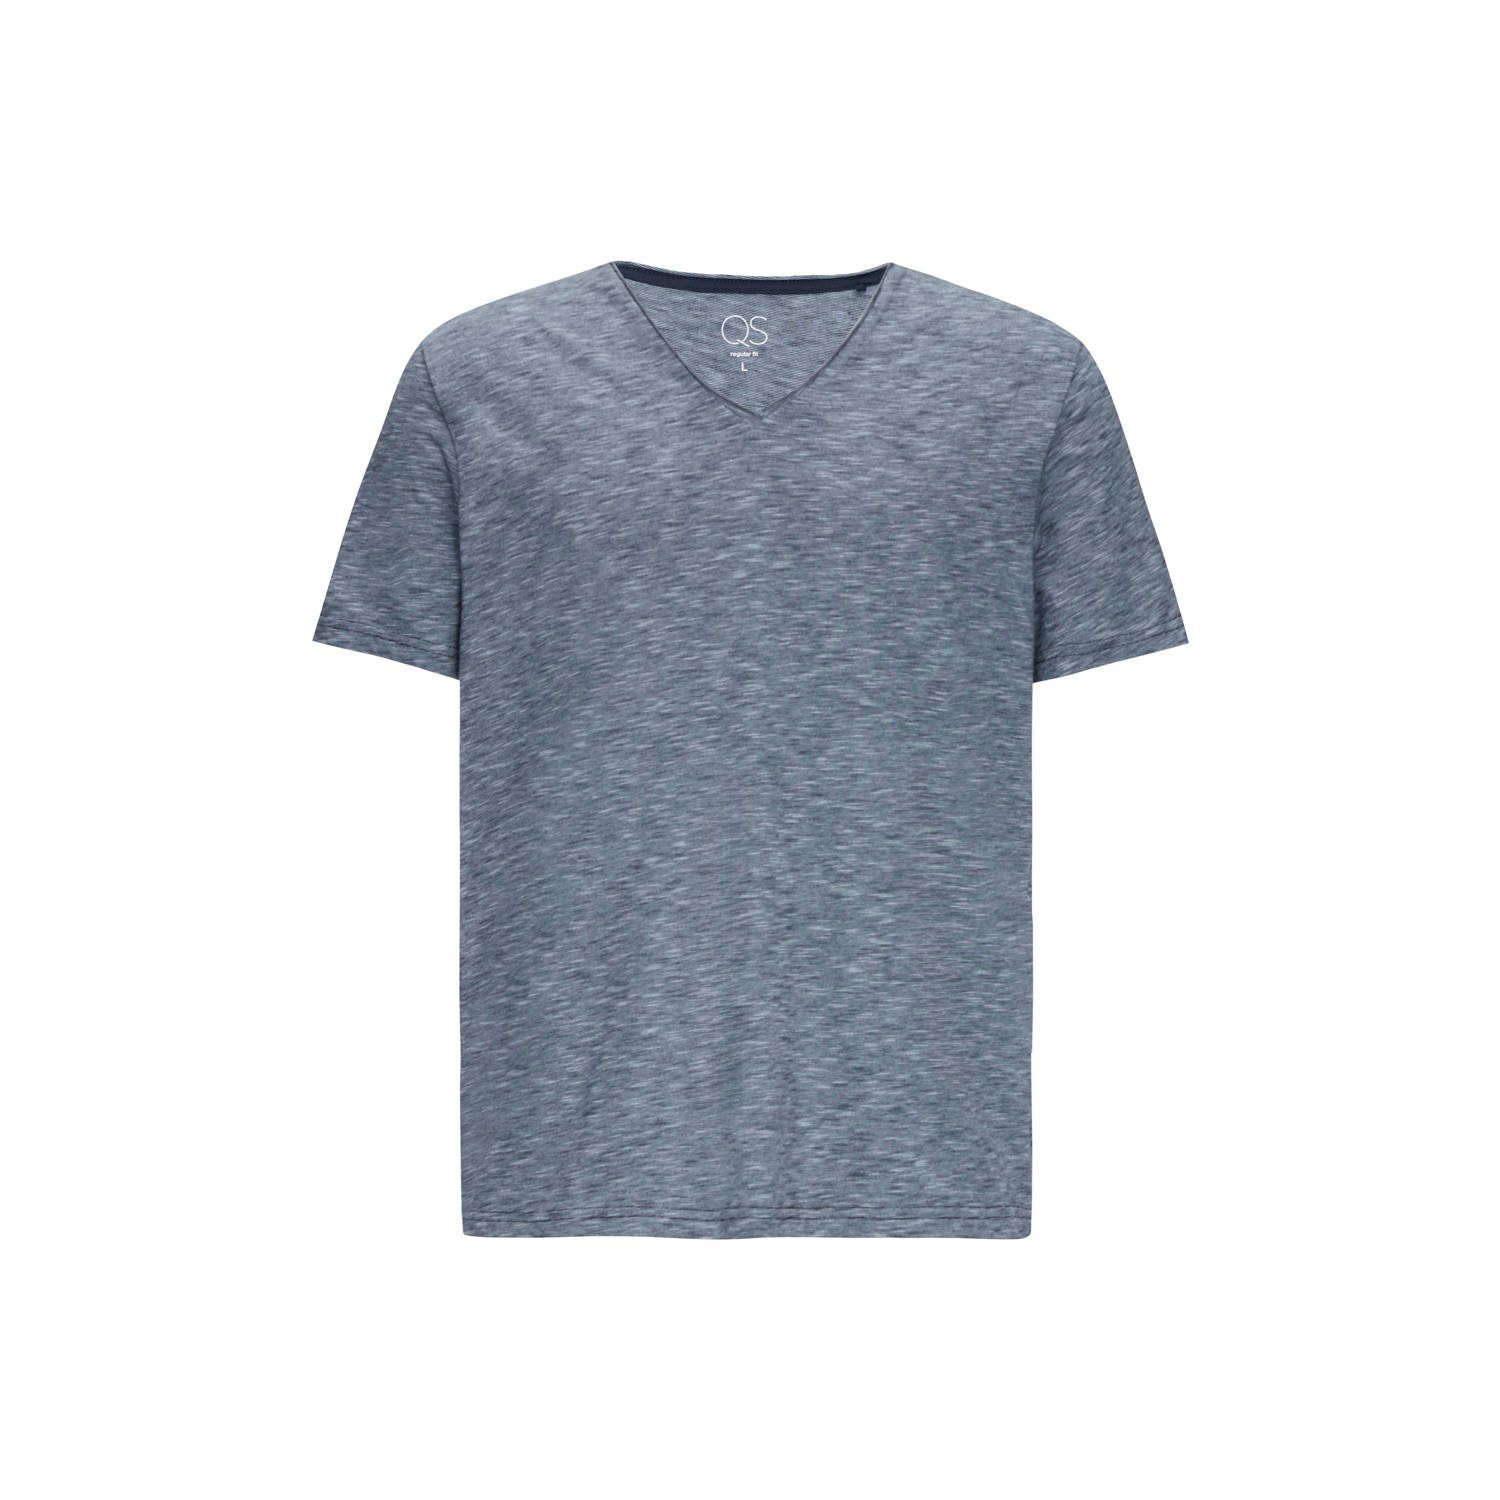 Q S by s.Oliver regular fit T-shirt donkerblauw